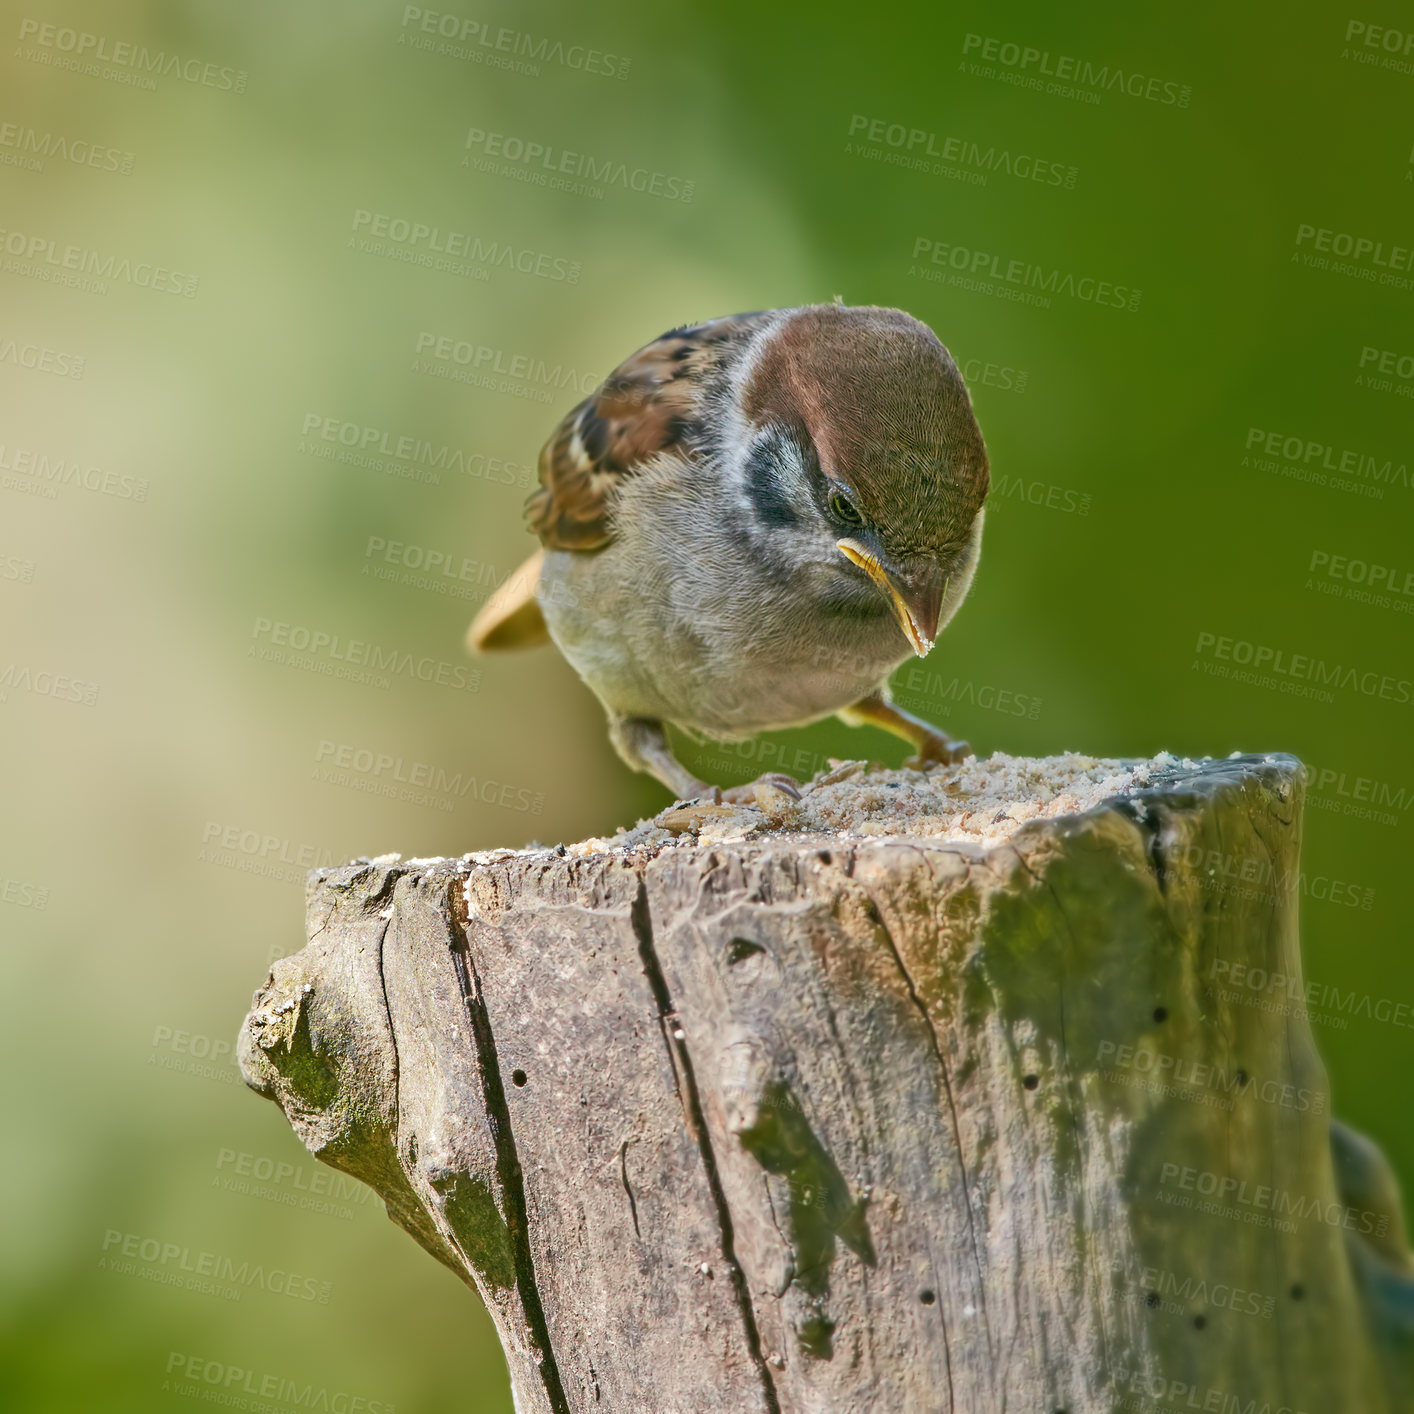 Buy stock photo Closeup of a brown garden sparrow bird eating seeds. Small birdie sitting on a tree trunk in a garden or forest outdoors with copy space. Birdwatching to study wildlife in their natural environment